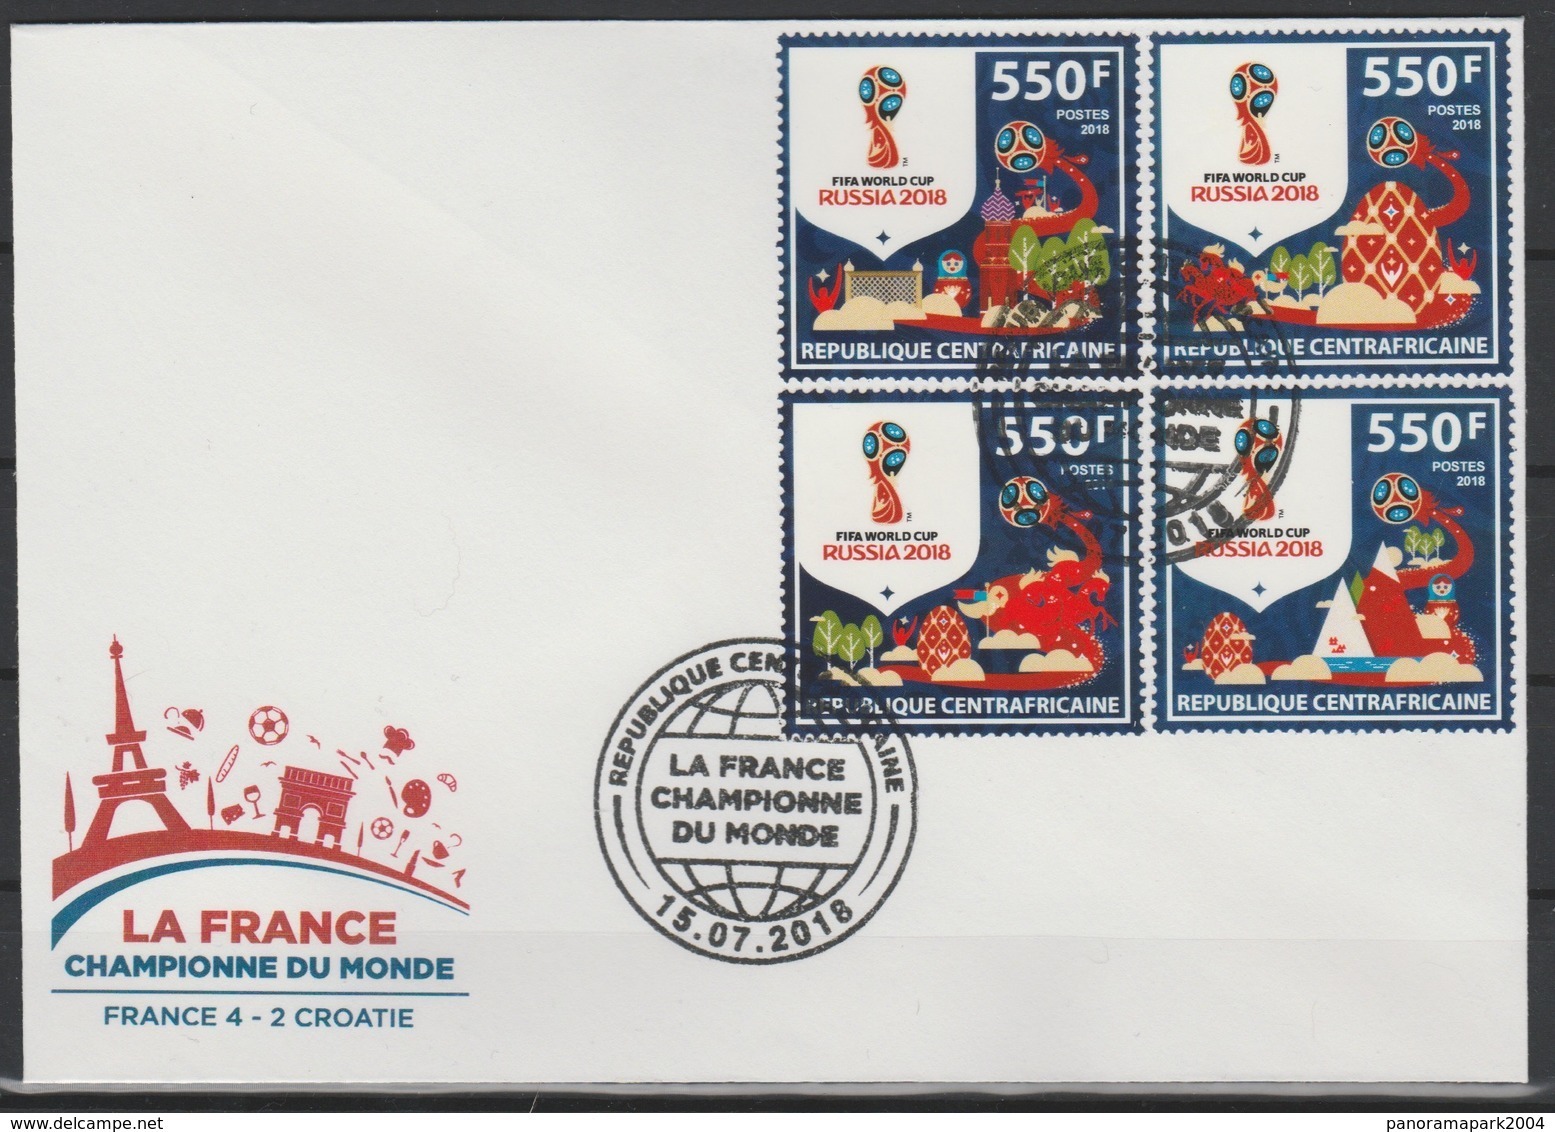 Centrafrique 2018 FDC Cover 15.07.2018 "FRANCE CHAMPION" FIFA World Cup WM Coupe Du Monde Russie Russia Football Fußball - 2018 – Russia